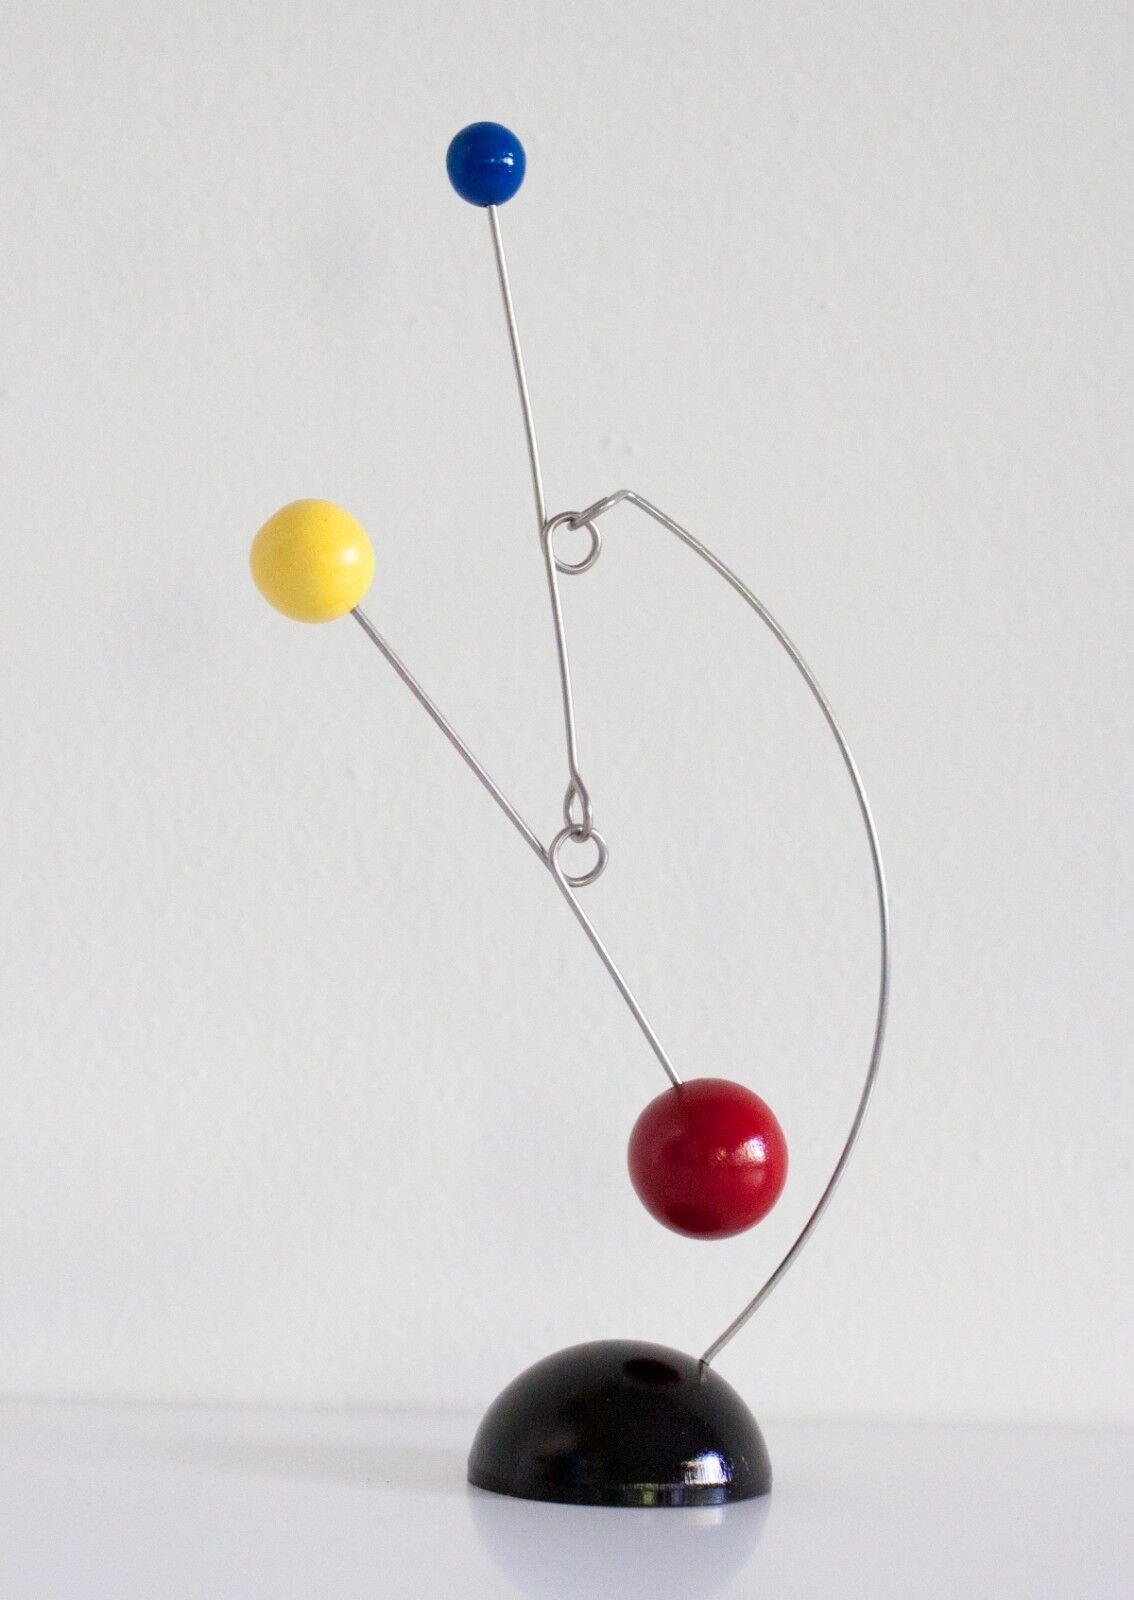 Red, Yellow, Blue & Black Tabletop Mobile Mid-century Modern Sculpture Stabile